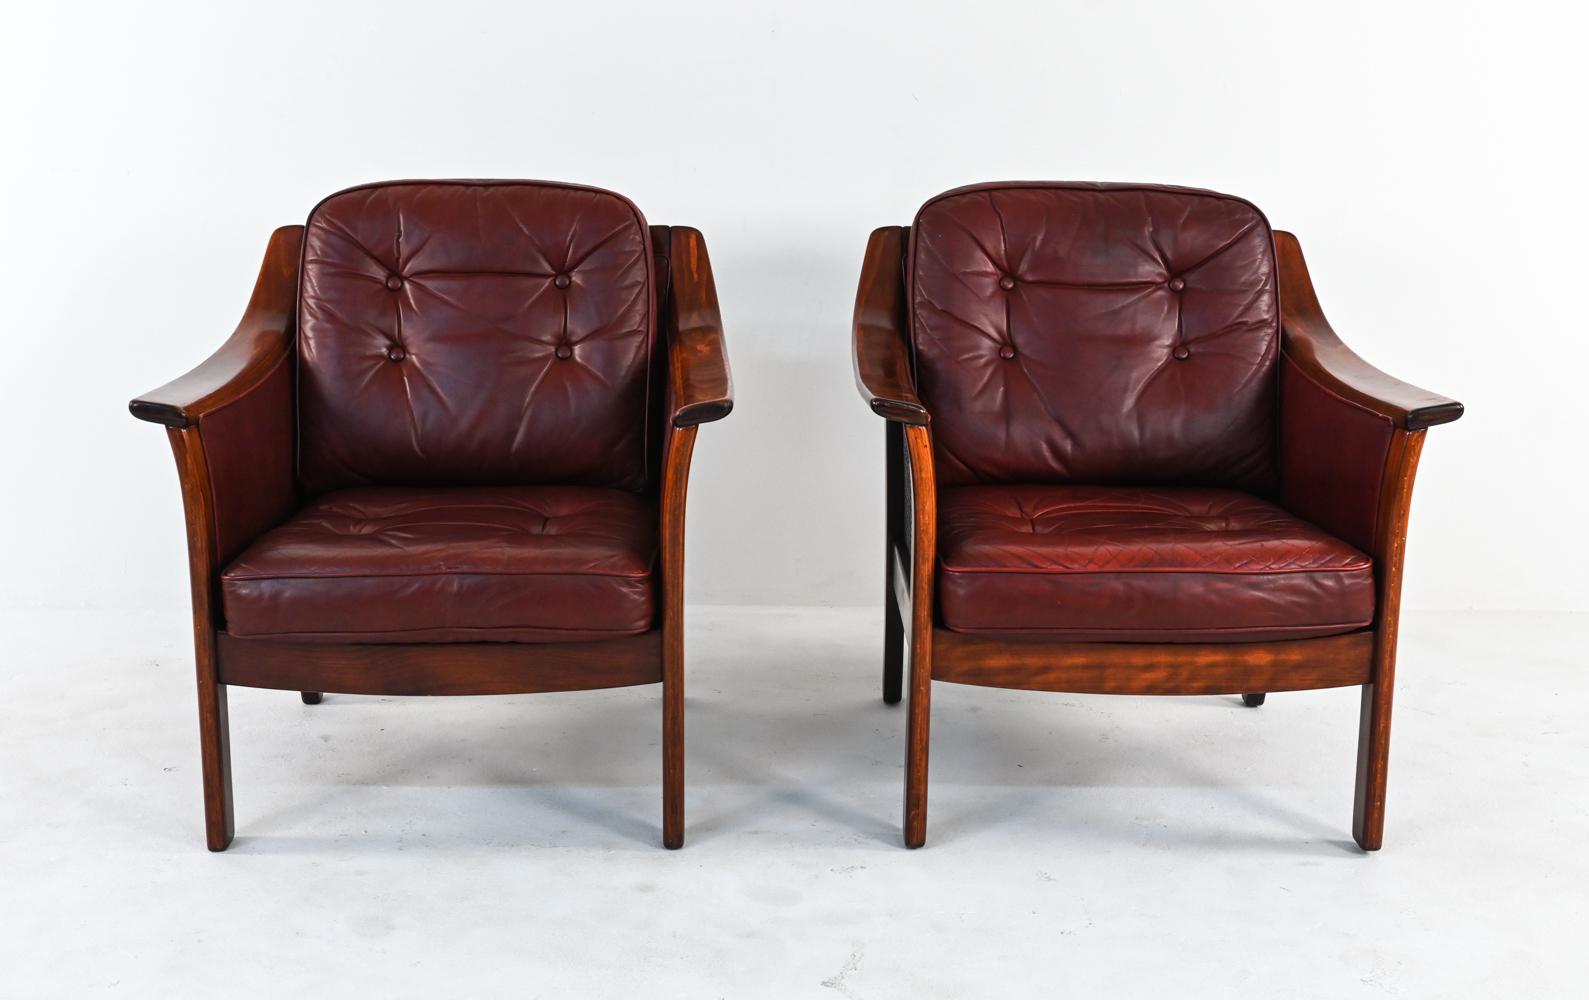 A rare and unusual pair of Norwegian mid-century lounge chairs designed by Torbjorn Afdal and manufactured by Bruksbo, Norway. Designed in the late 1960's and produced c. 1970's, these Scandinavian modern easy chairs feature subtly flared sides with